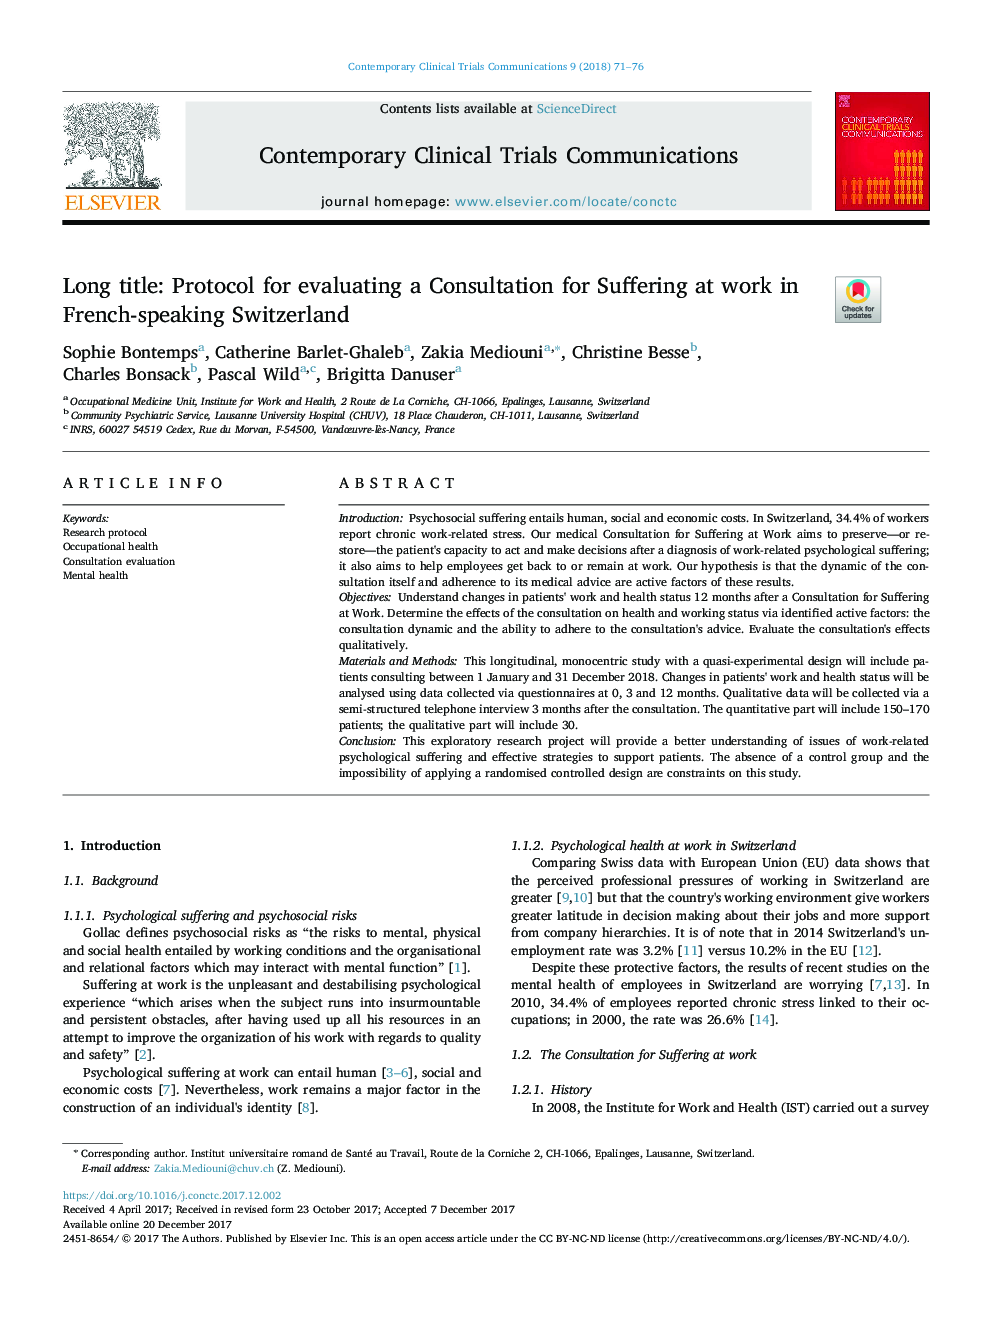 Long title: Protocol for evaluating a Consultation for Suffering at work in French-speaking Switzerland